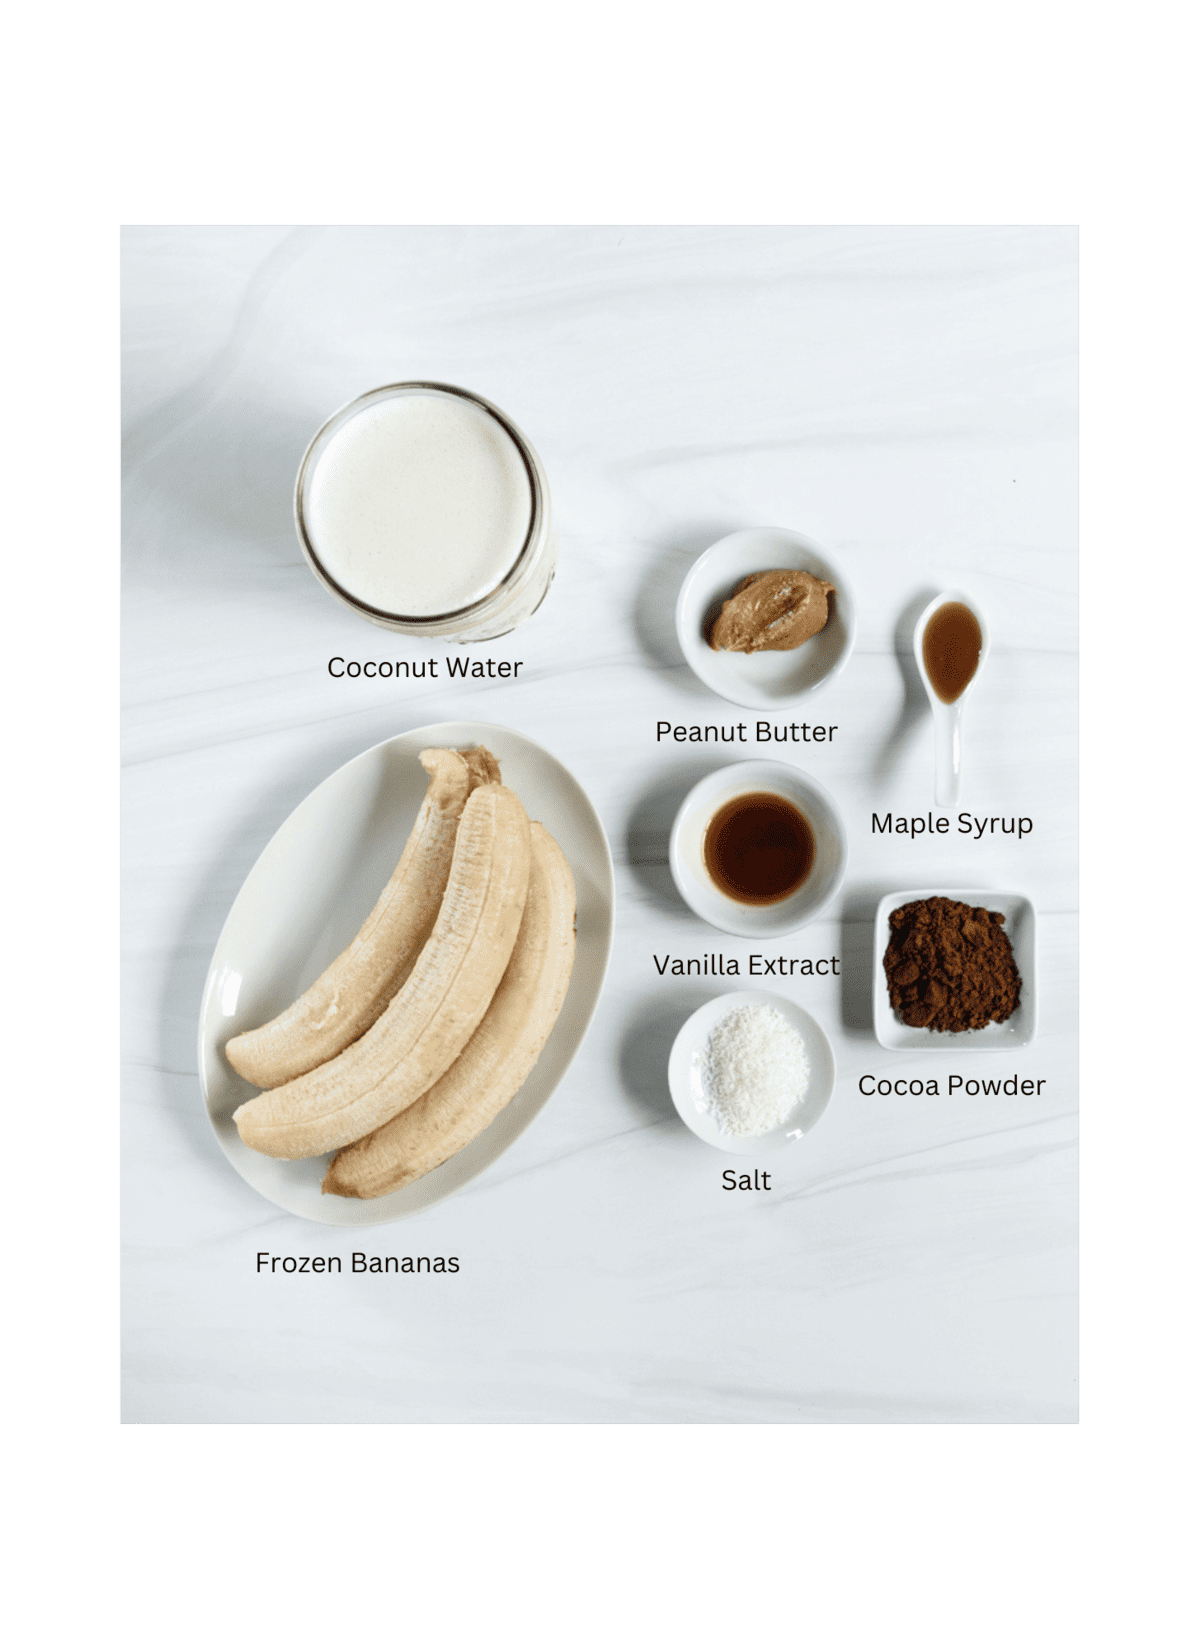 ingredients for Chocolate Peanut Butter Banana Smoothie against a white surface